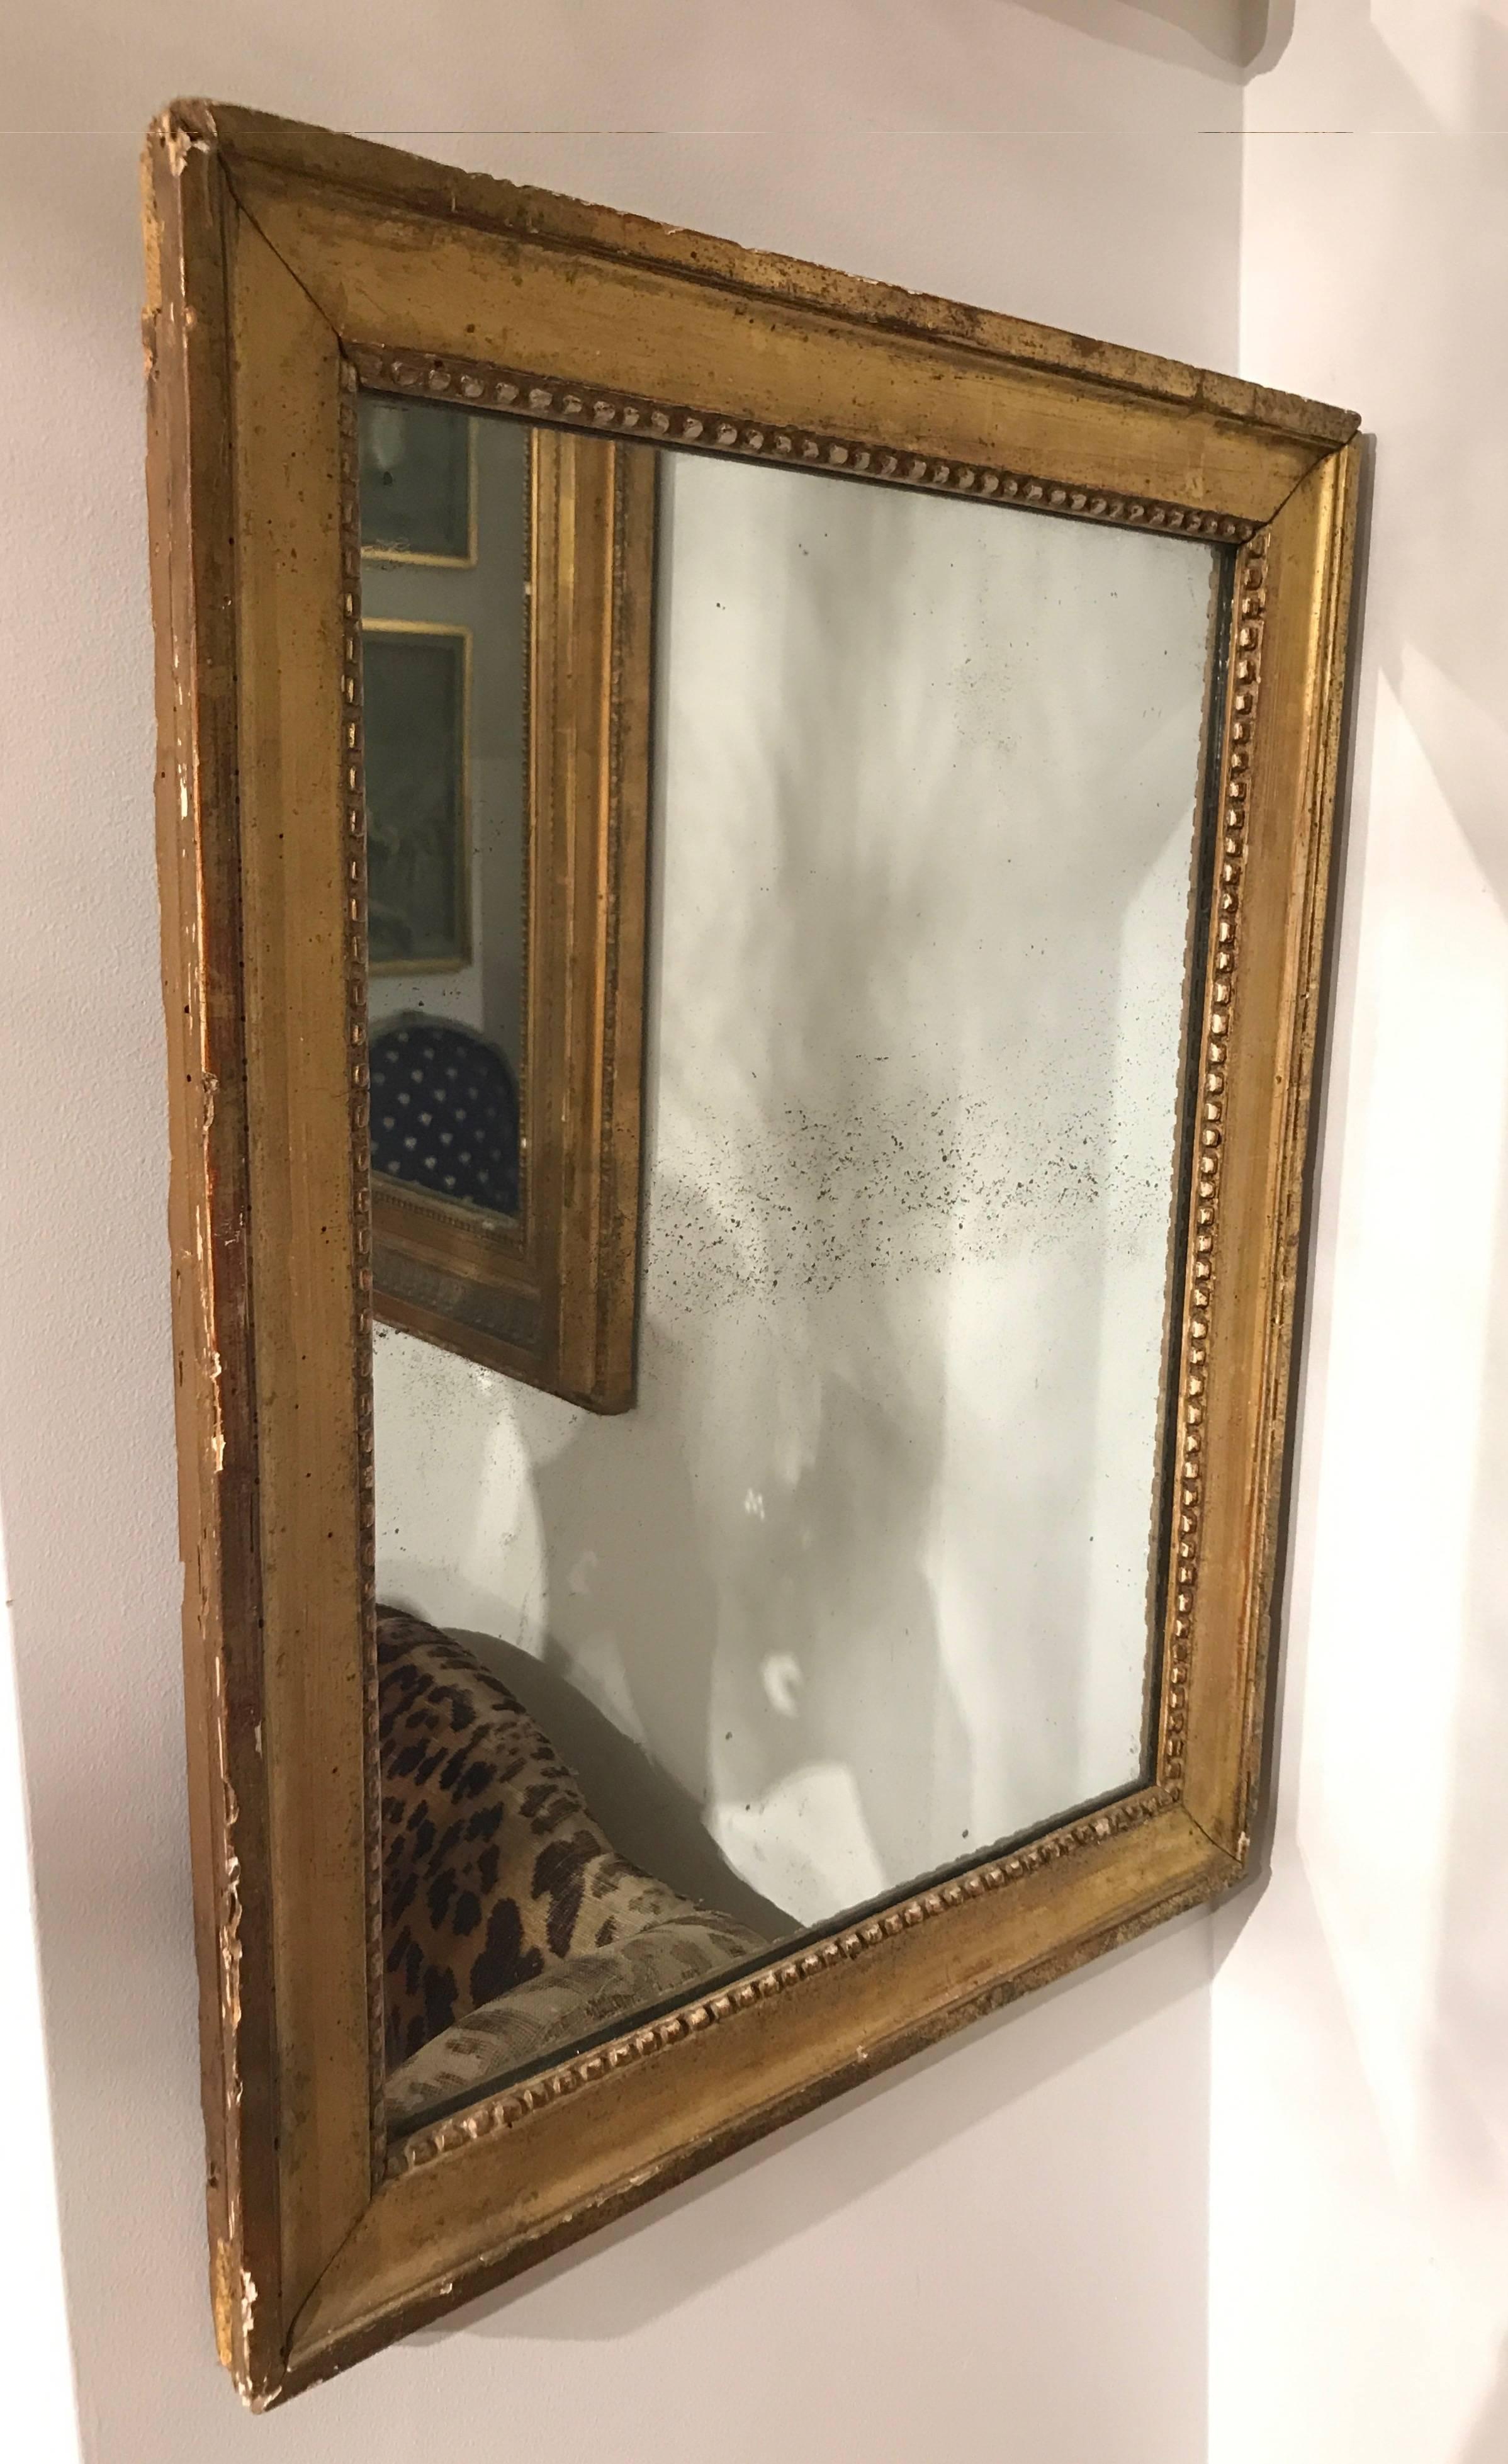 Small-scale giltwood mirror with beaded detailing and original glass.